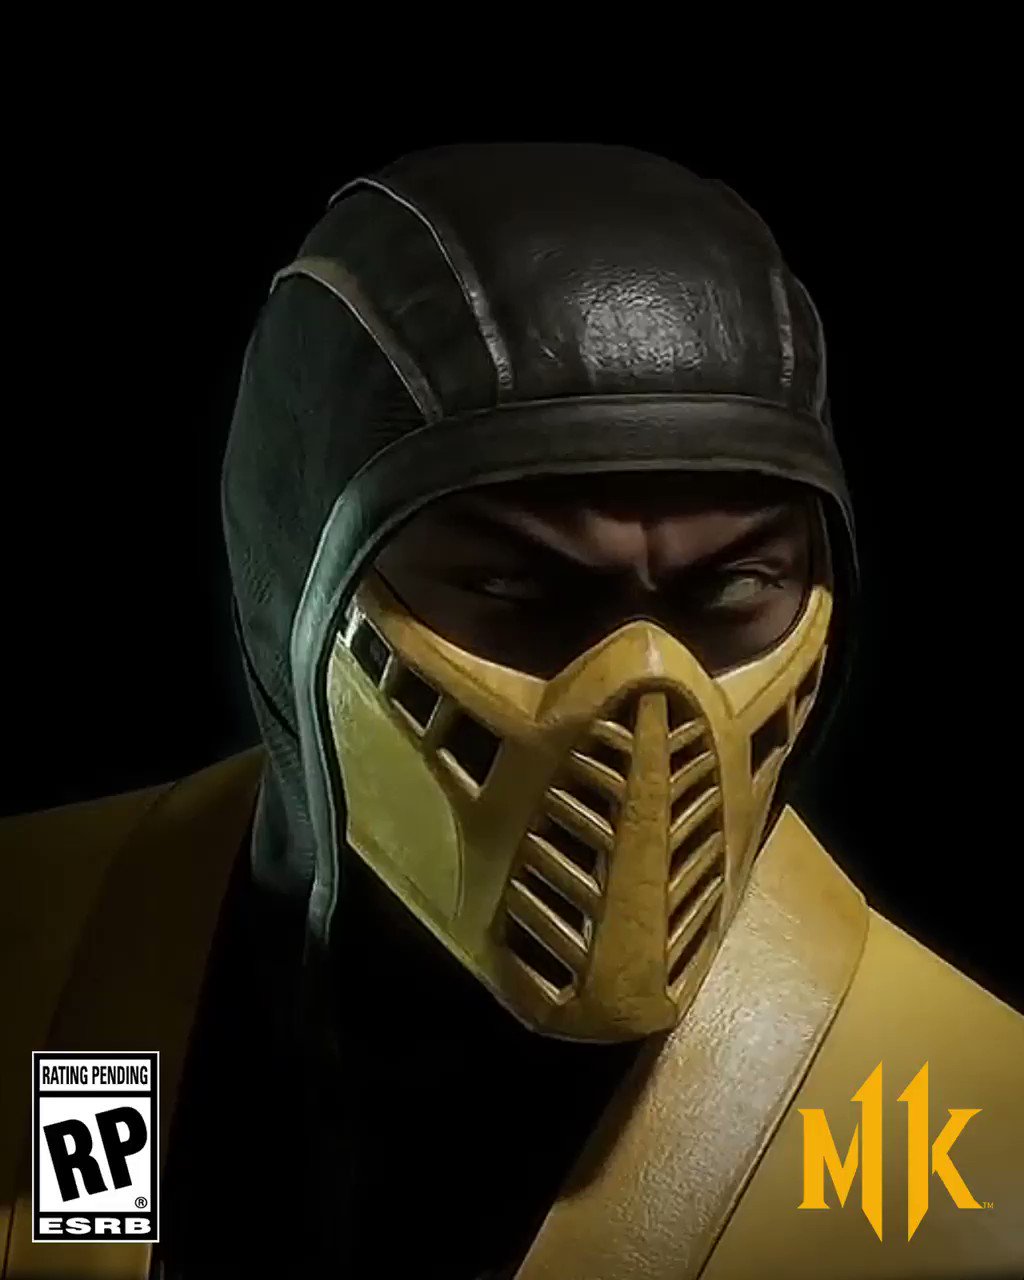 Uovertruffen hyppigt tornado Ed Boon on Twitter: "Pick a Scorpion mask. Any mask.  https://t.co/JyVCACP1Um" / Twitter